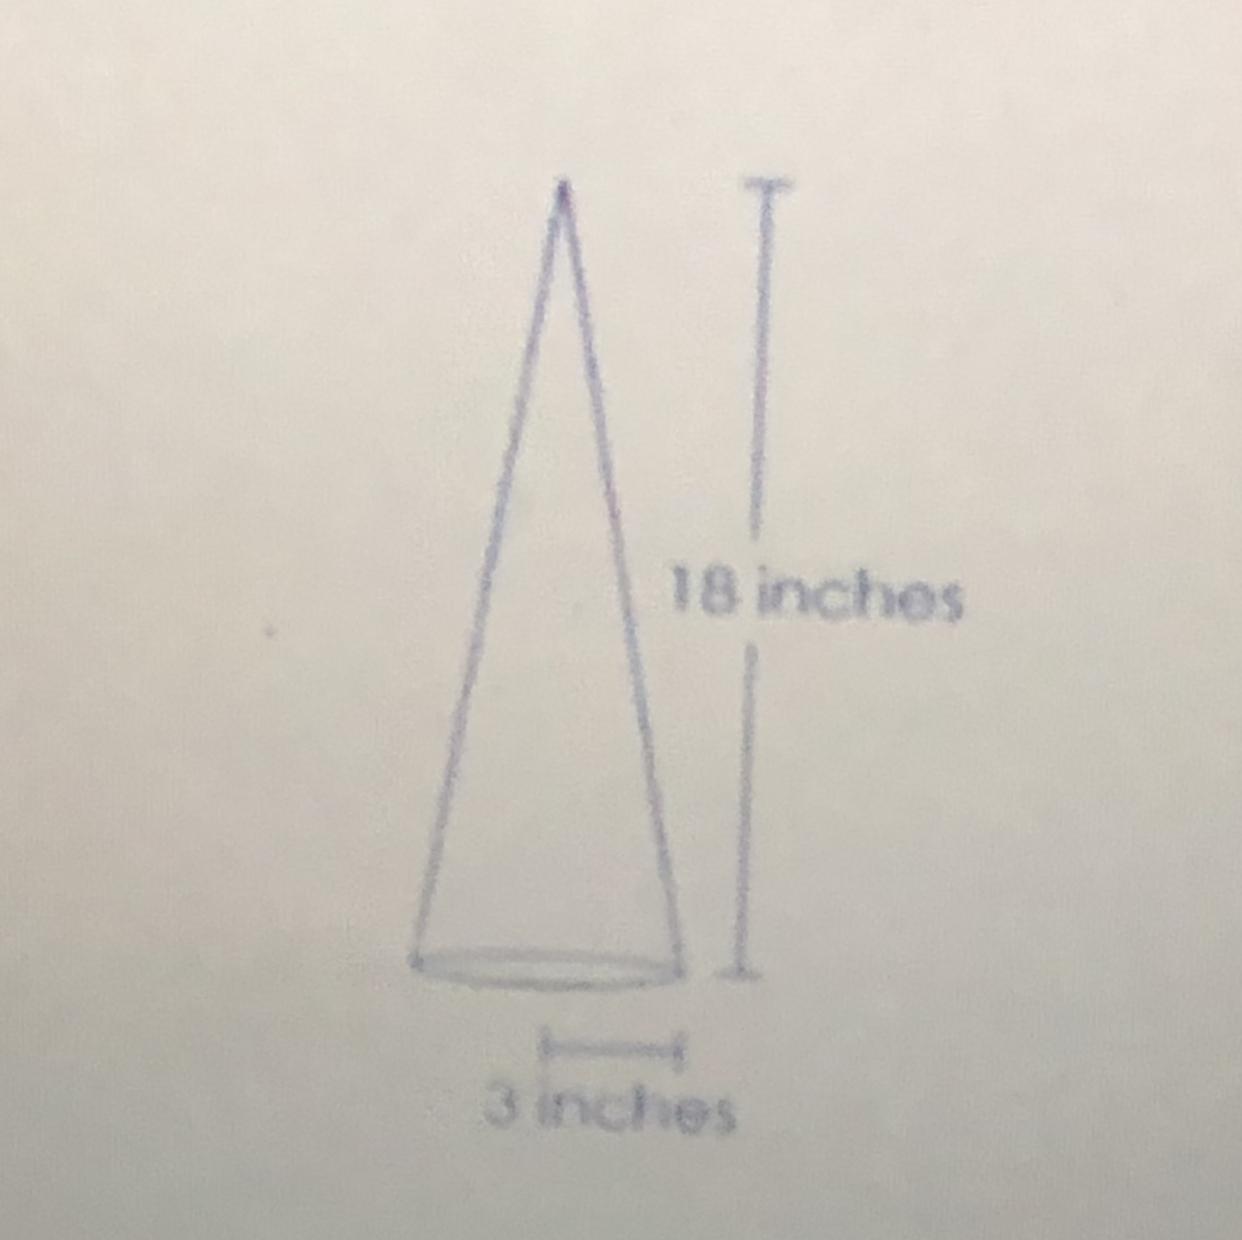 A Cone With A Radius Of 3 Inches And A Height Of 18 Inches Is Shown What Is The Volume, In A Cubic Inches,